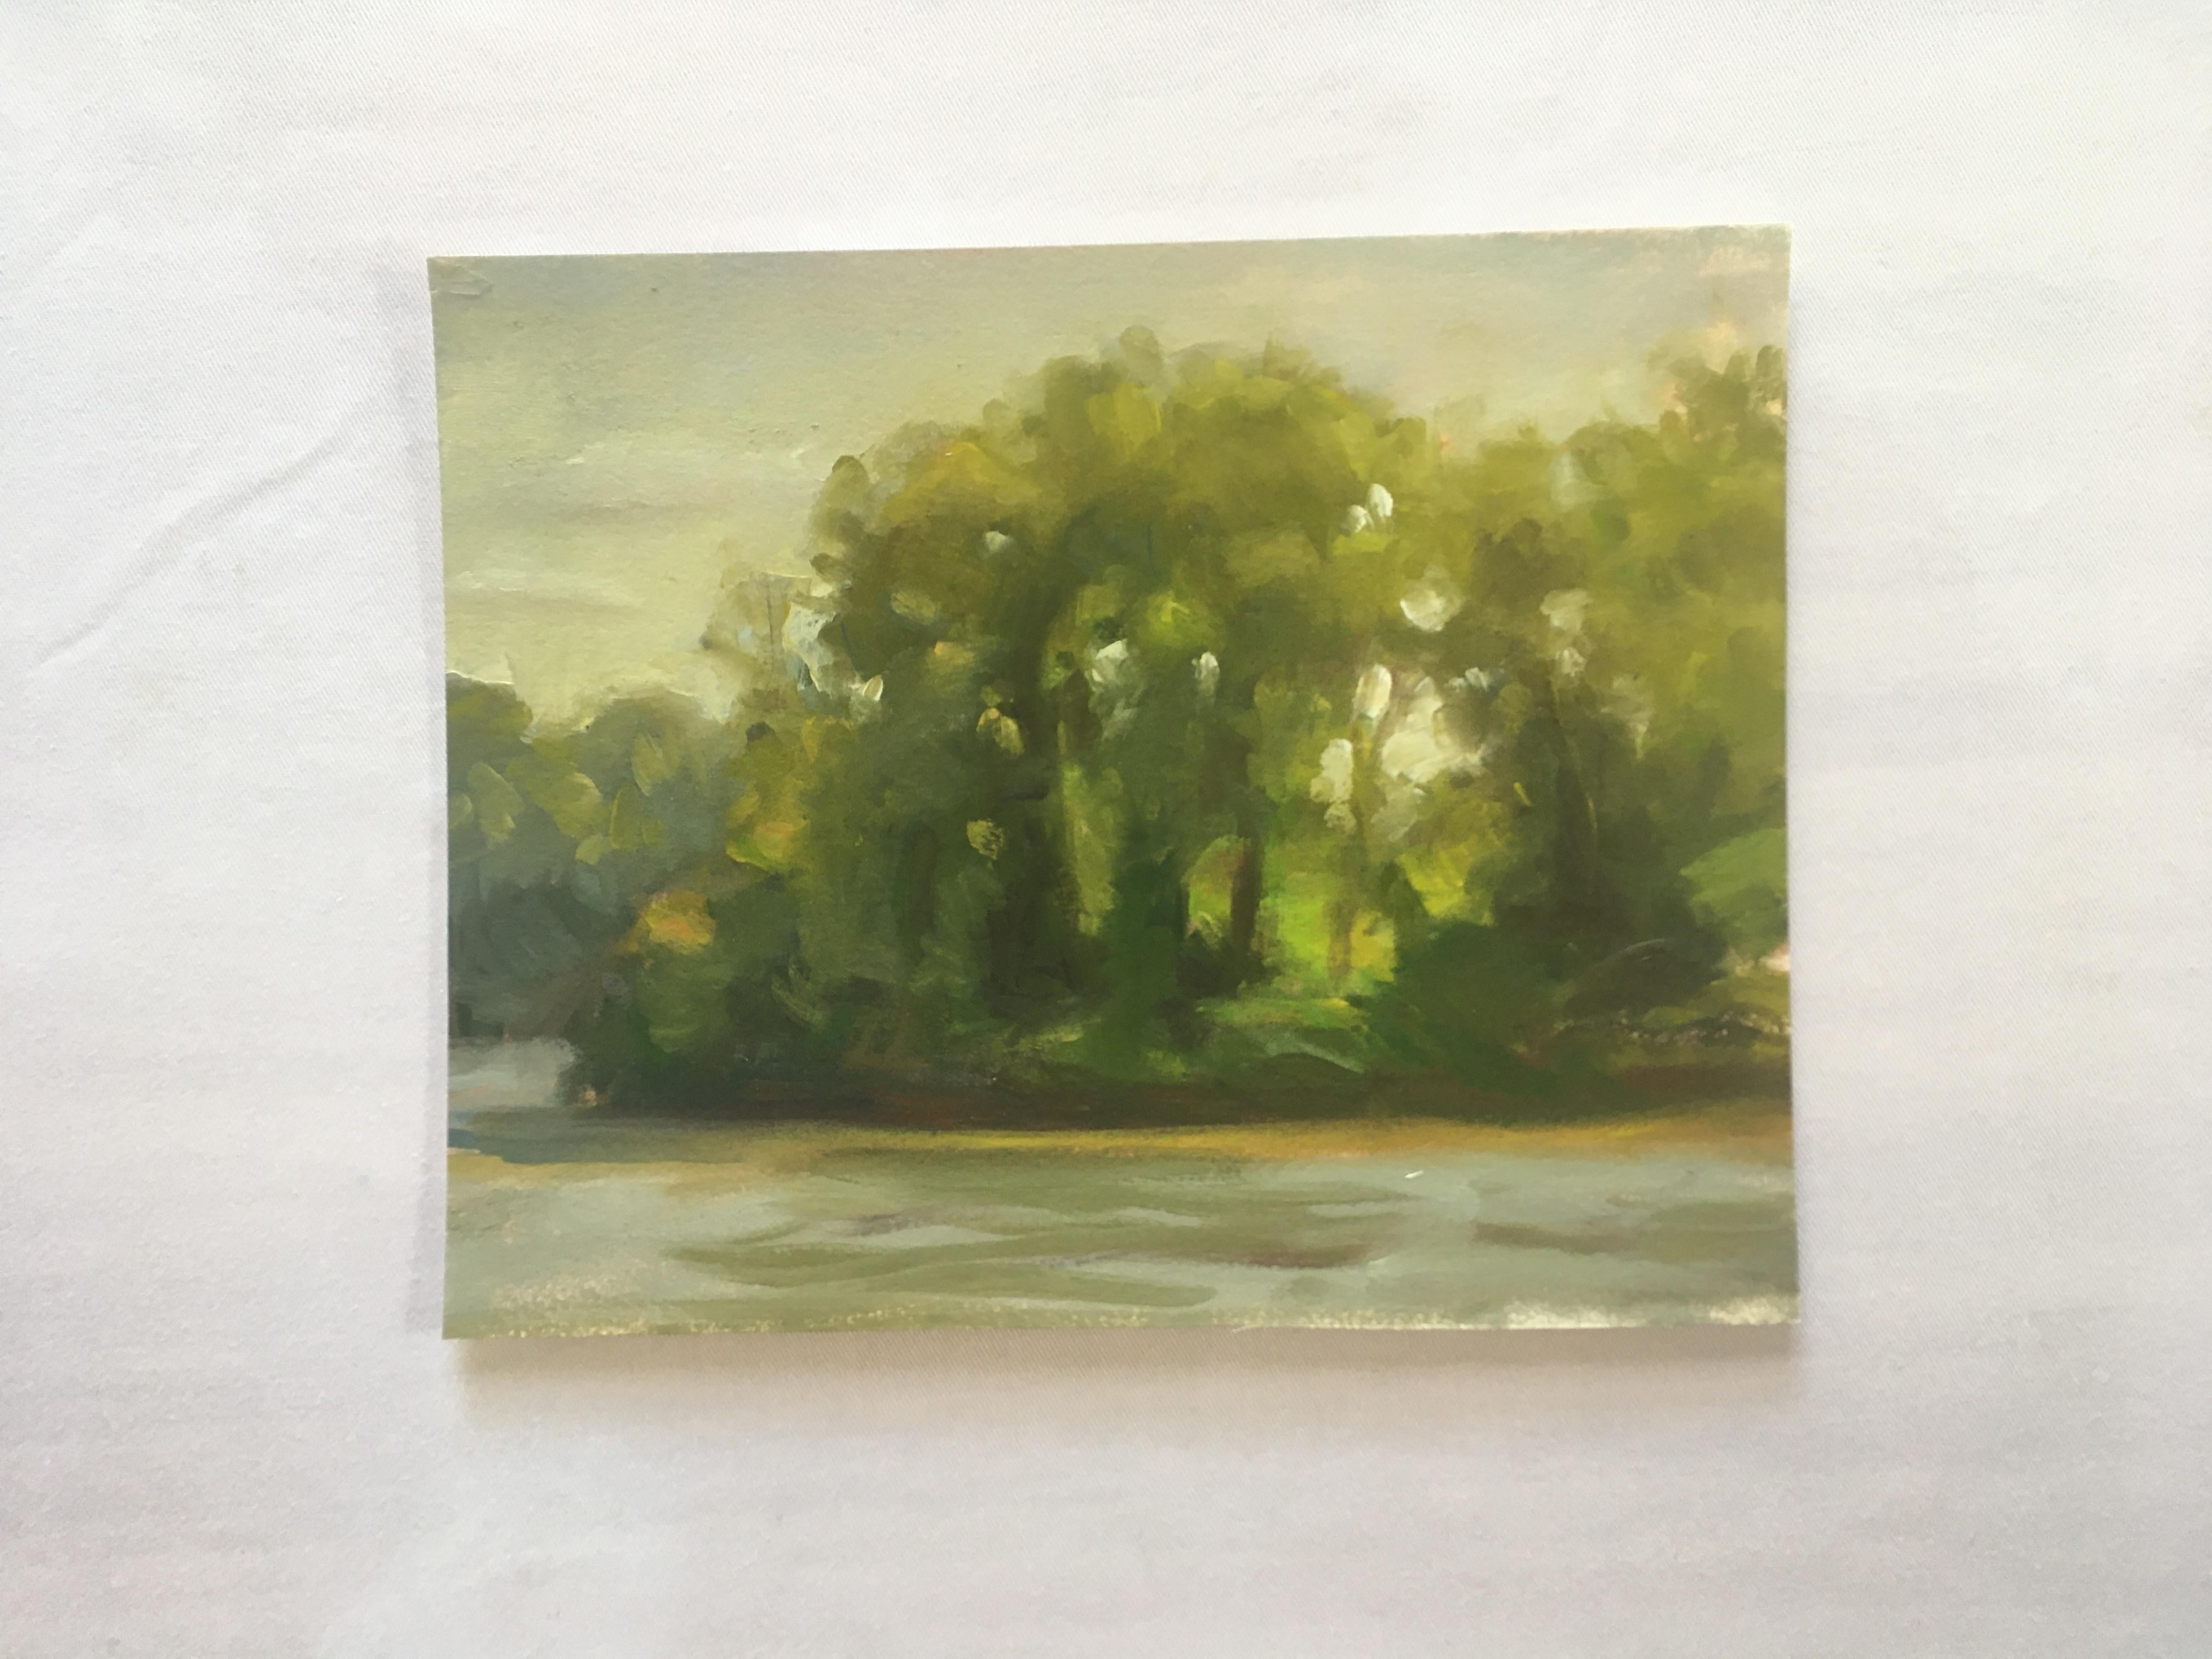 ISLAND-PERCY PRIEST - Landscape Painting of Nashville Tennessee Lake - Oil  - Art by Amanda Joy Brown